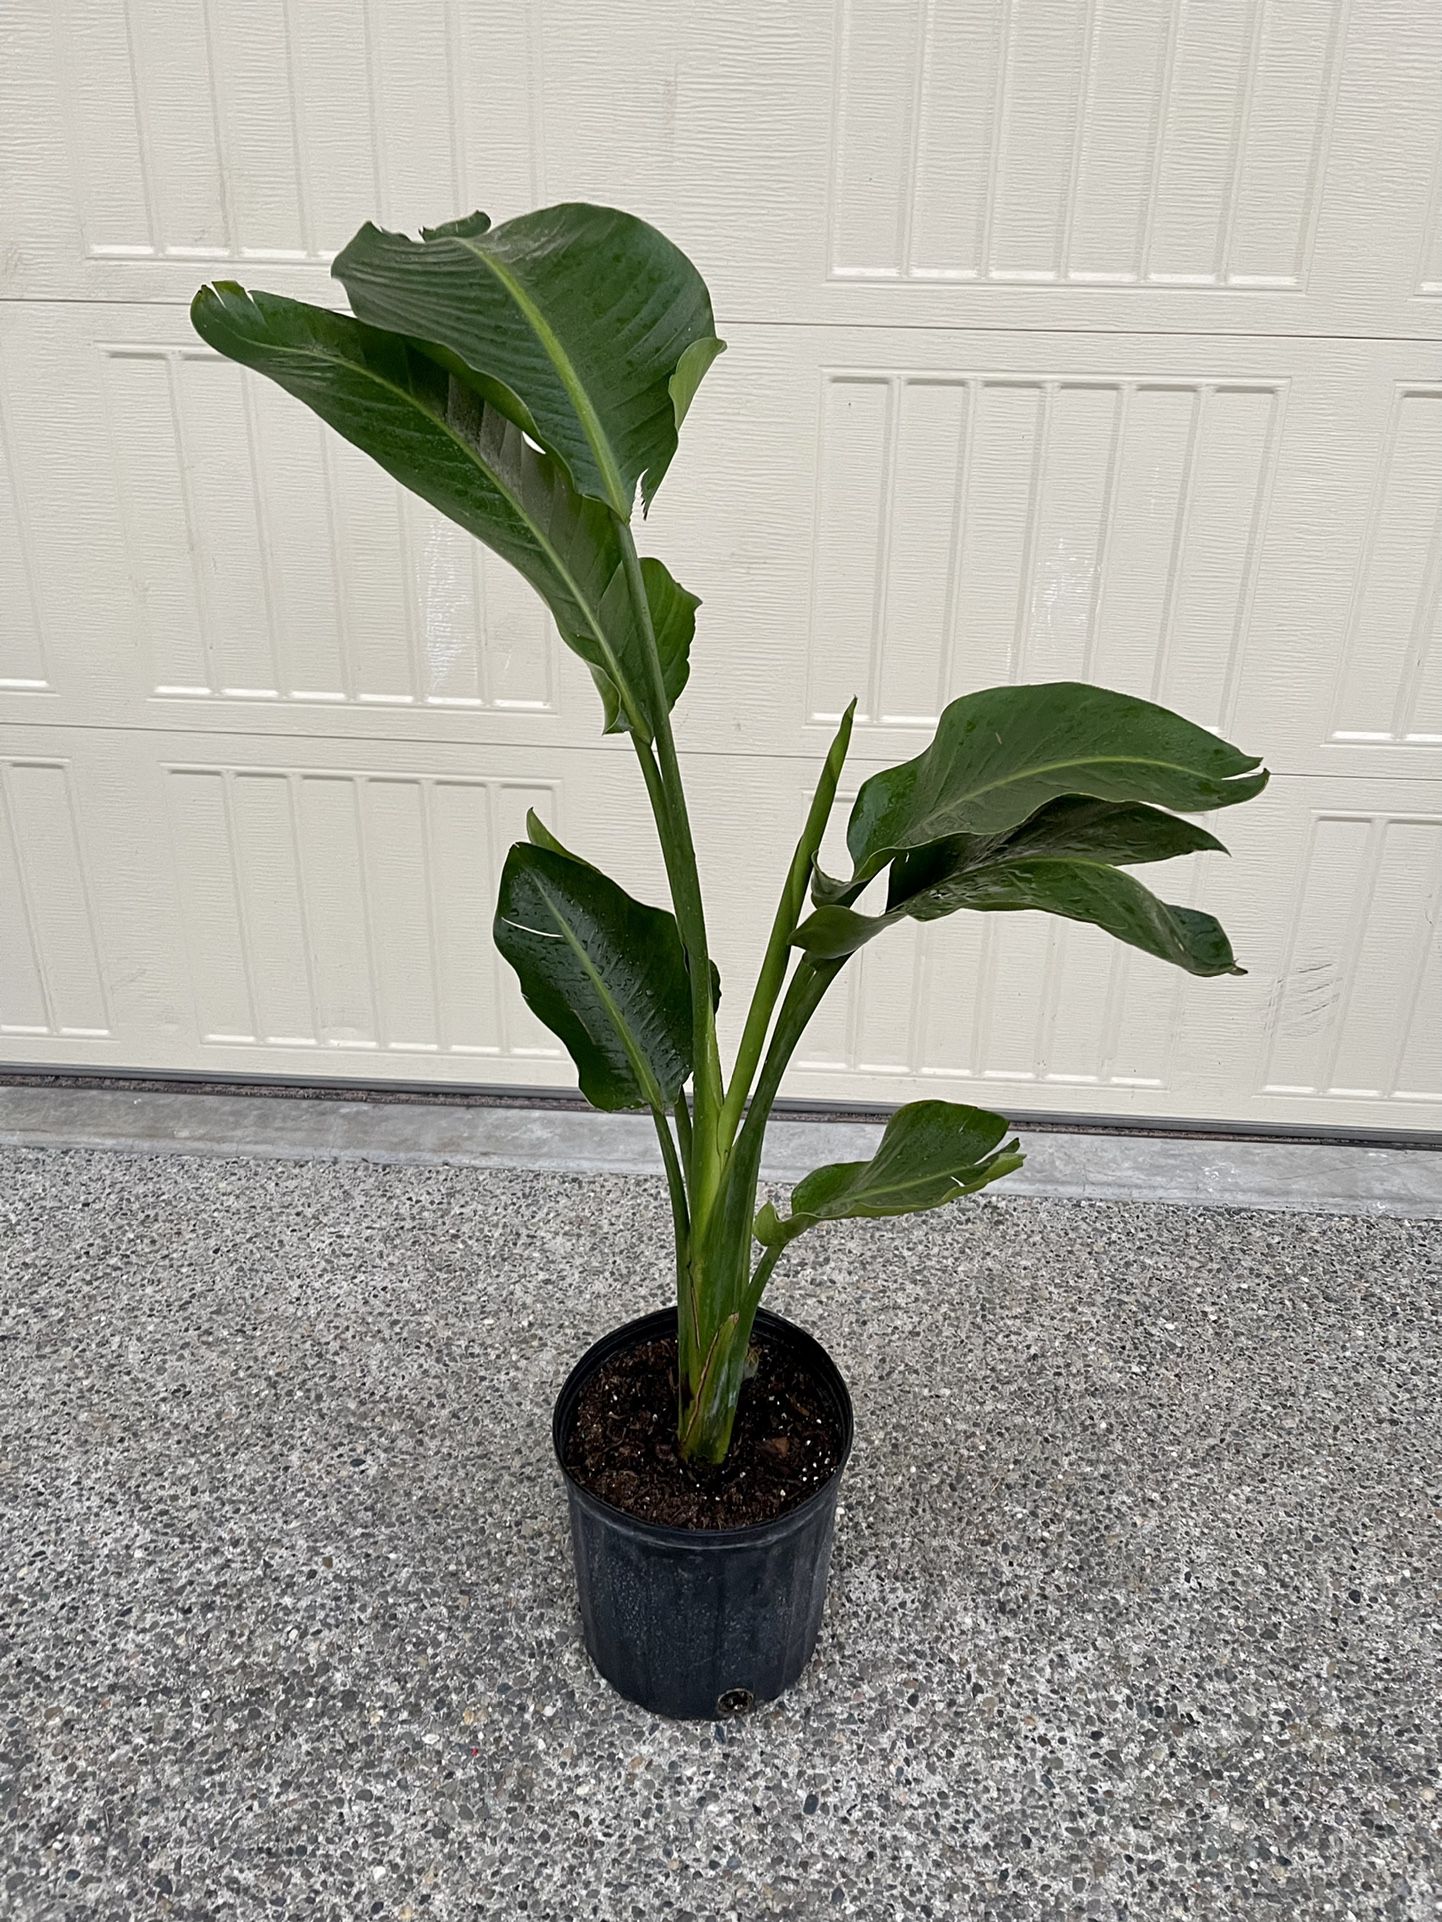 PENDING- 2 In 1 White Bird Of Paradise Indoor House Plant 🪴 3ft 5” Tall